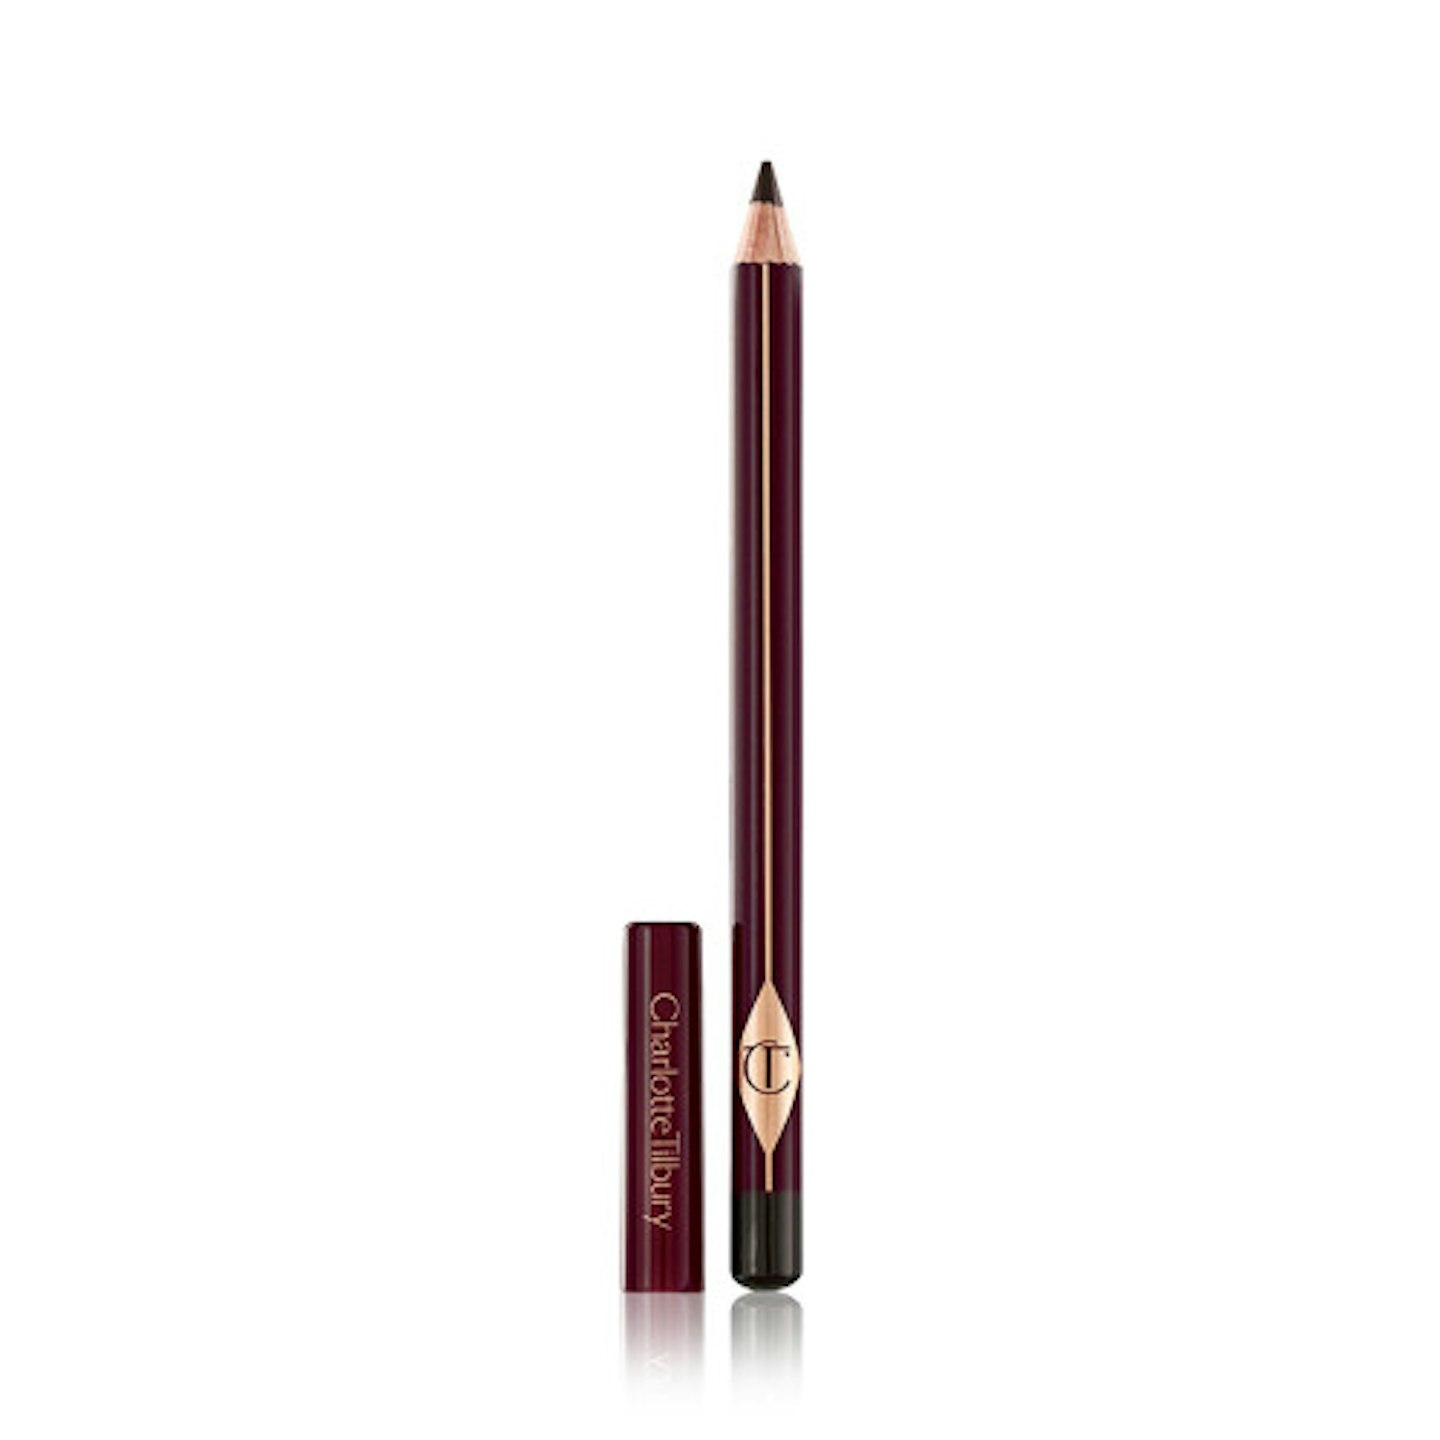 Charlotte Tilbury The Classic Eyeliner in Classic Brown 